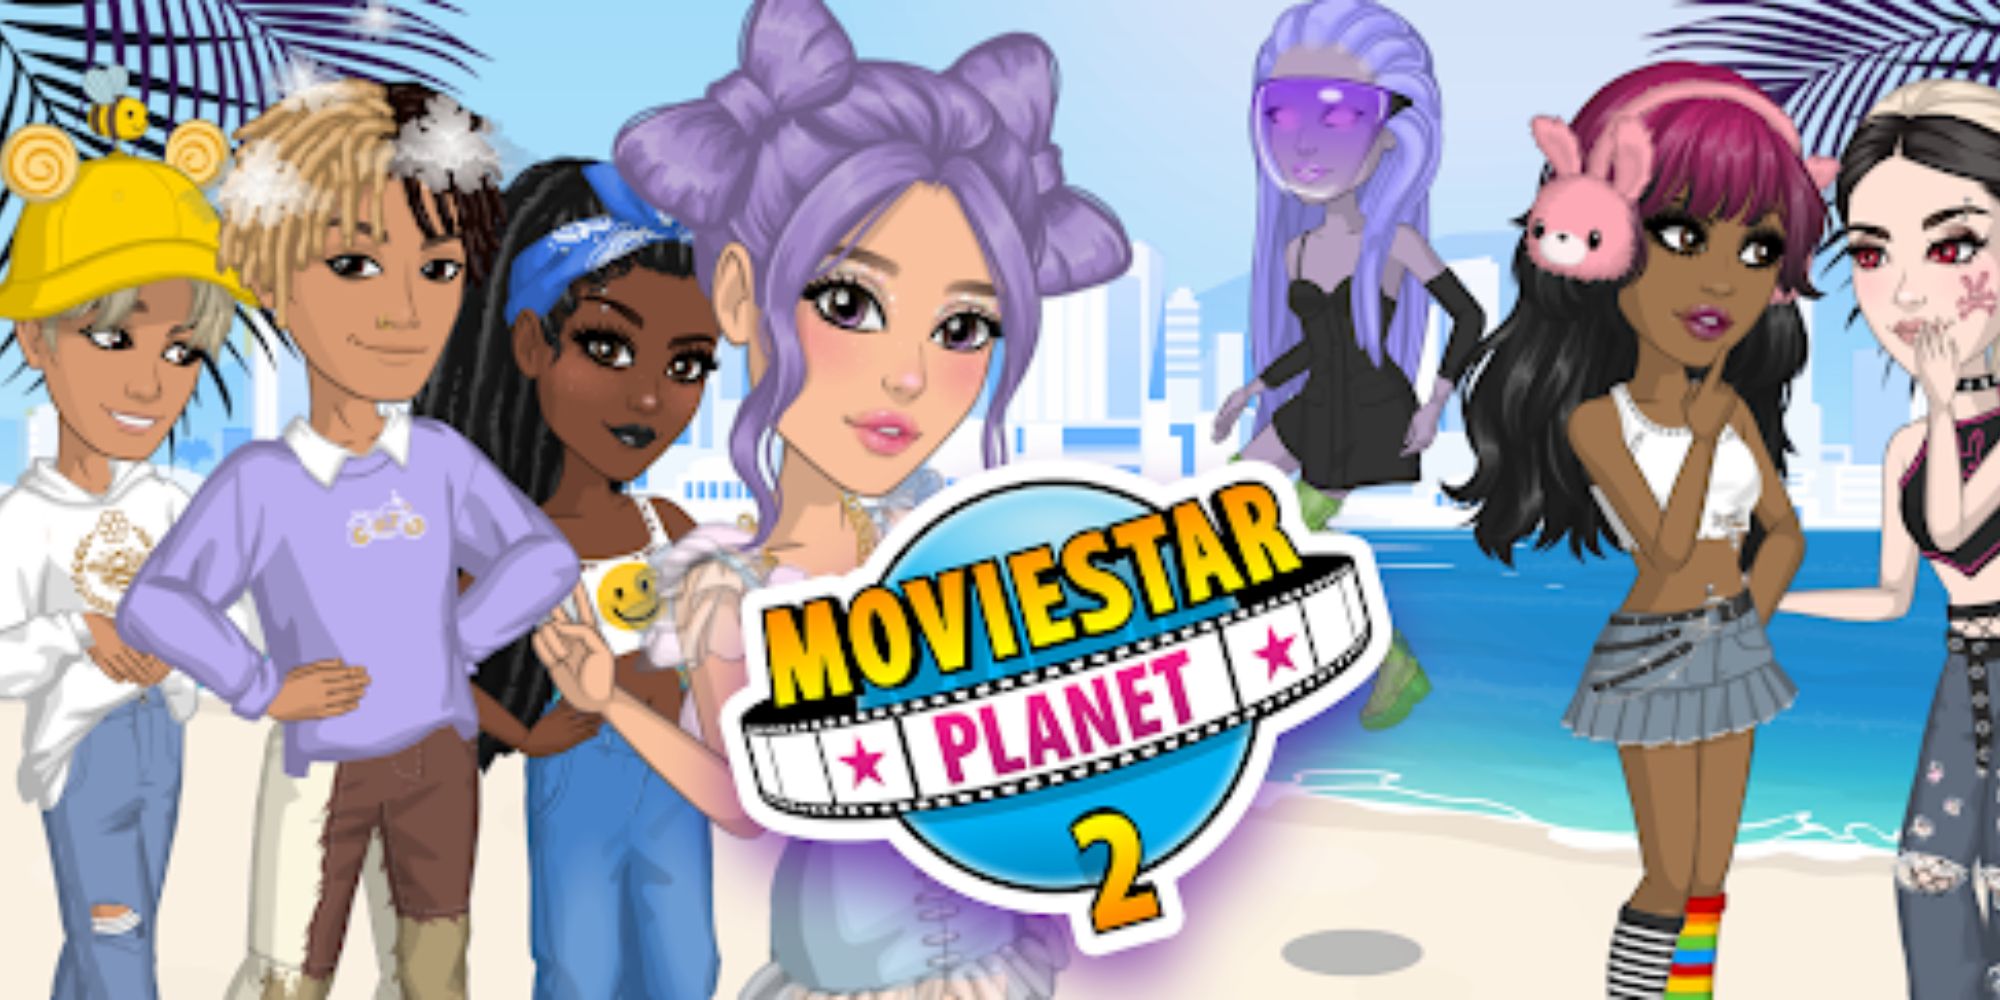 An image showcasing characters from Moviestarplanet 2